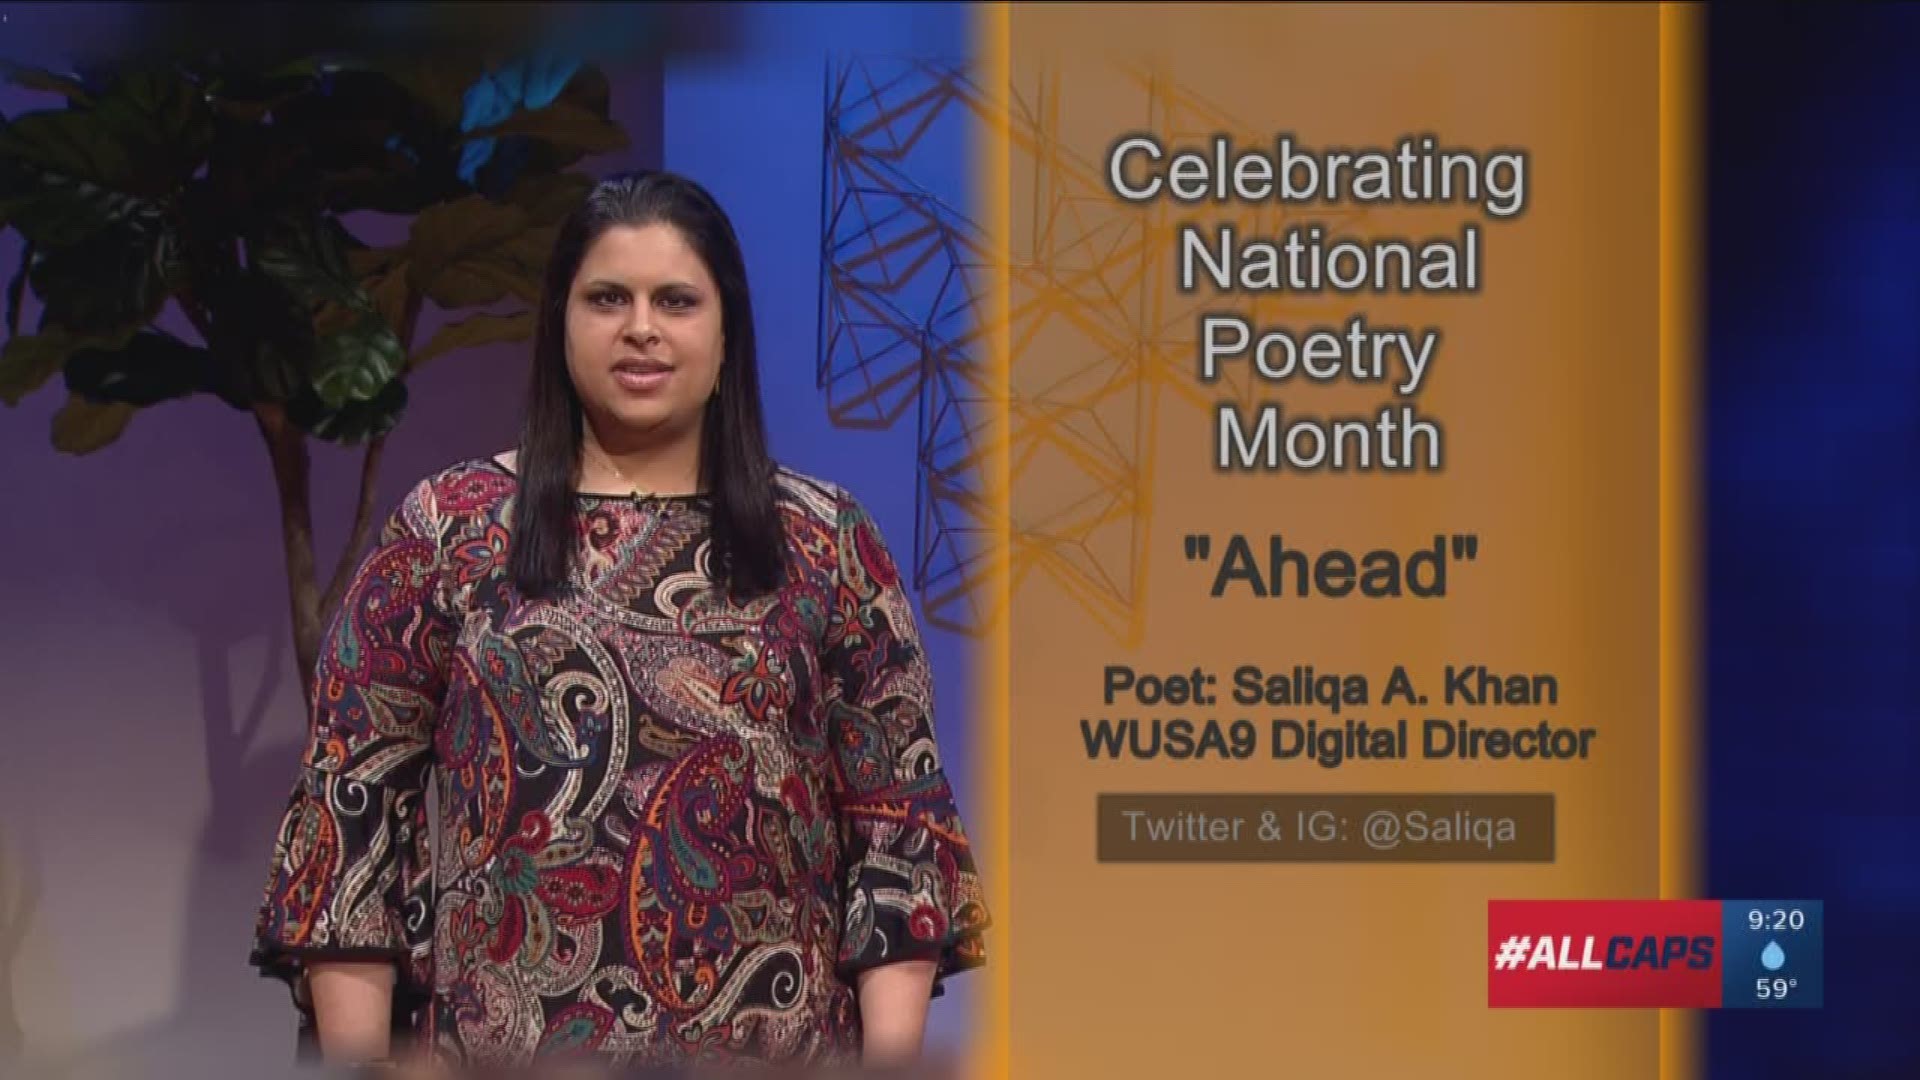 WUSA9 Digital Director Saliqa A. Khan performs her original piece "Ahead" for National Poetry Month.